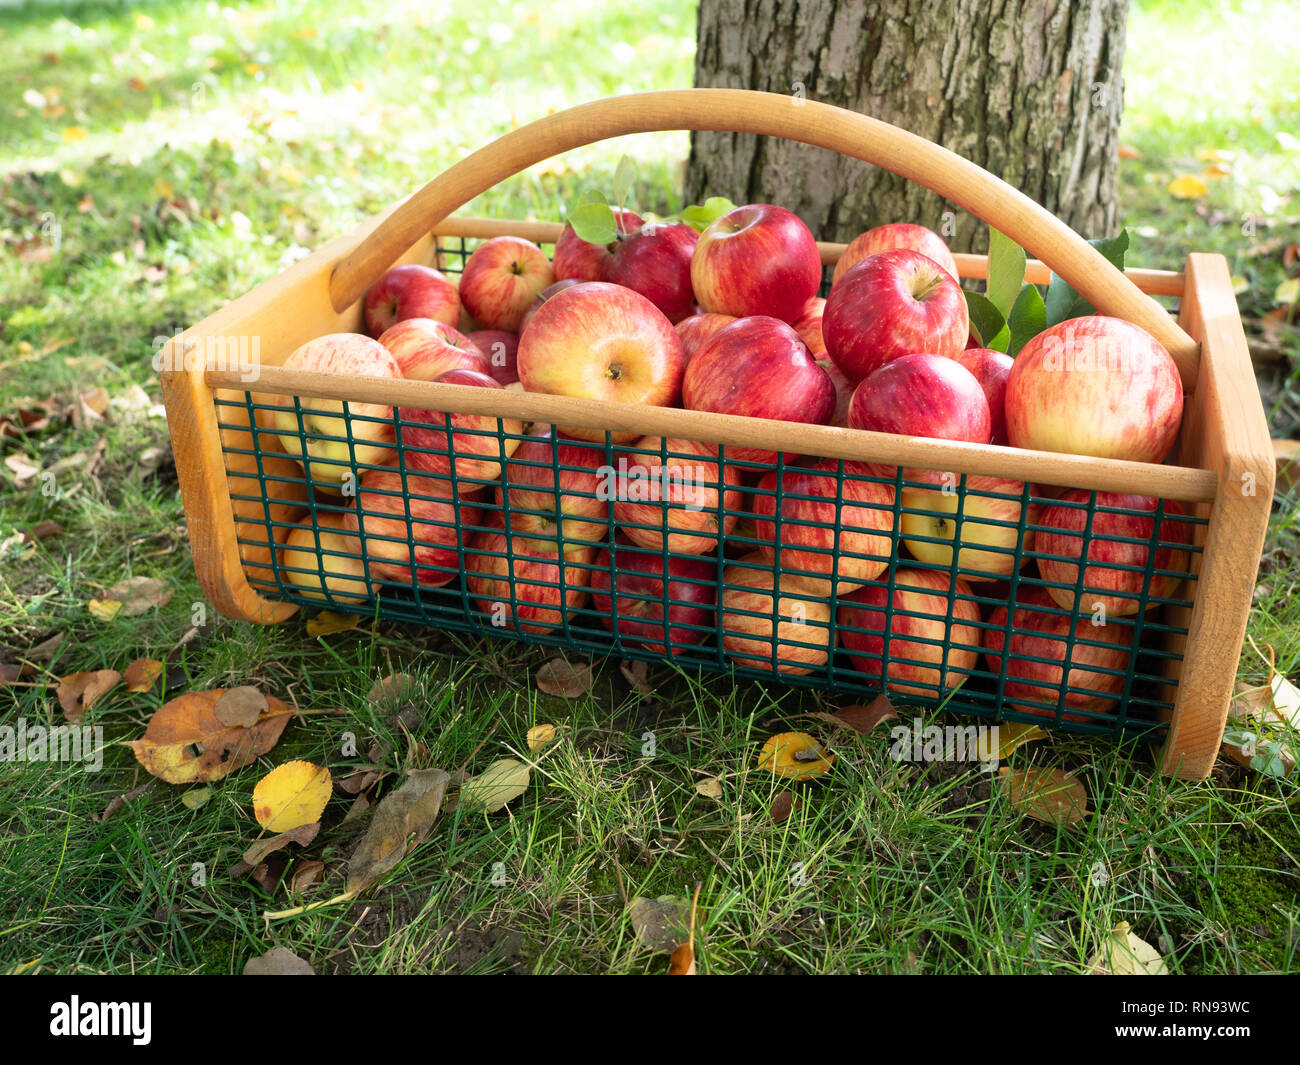 Wire and wood basket with ripe apples on grass with fallen leaves. Low angle view. Stock Photo